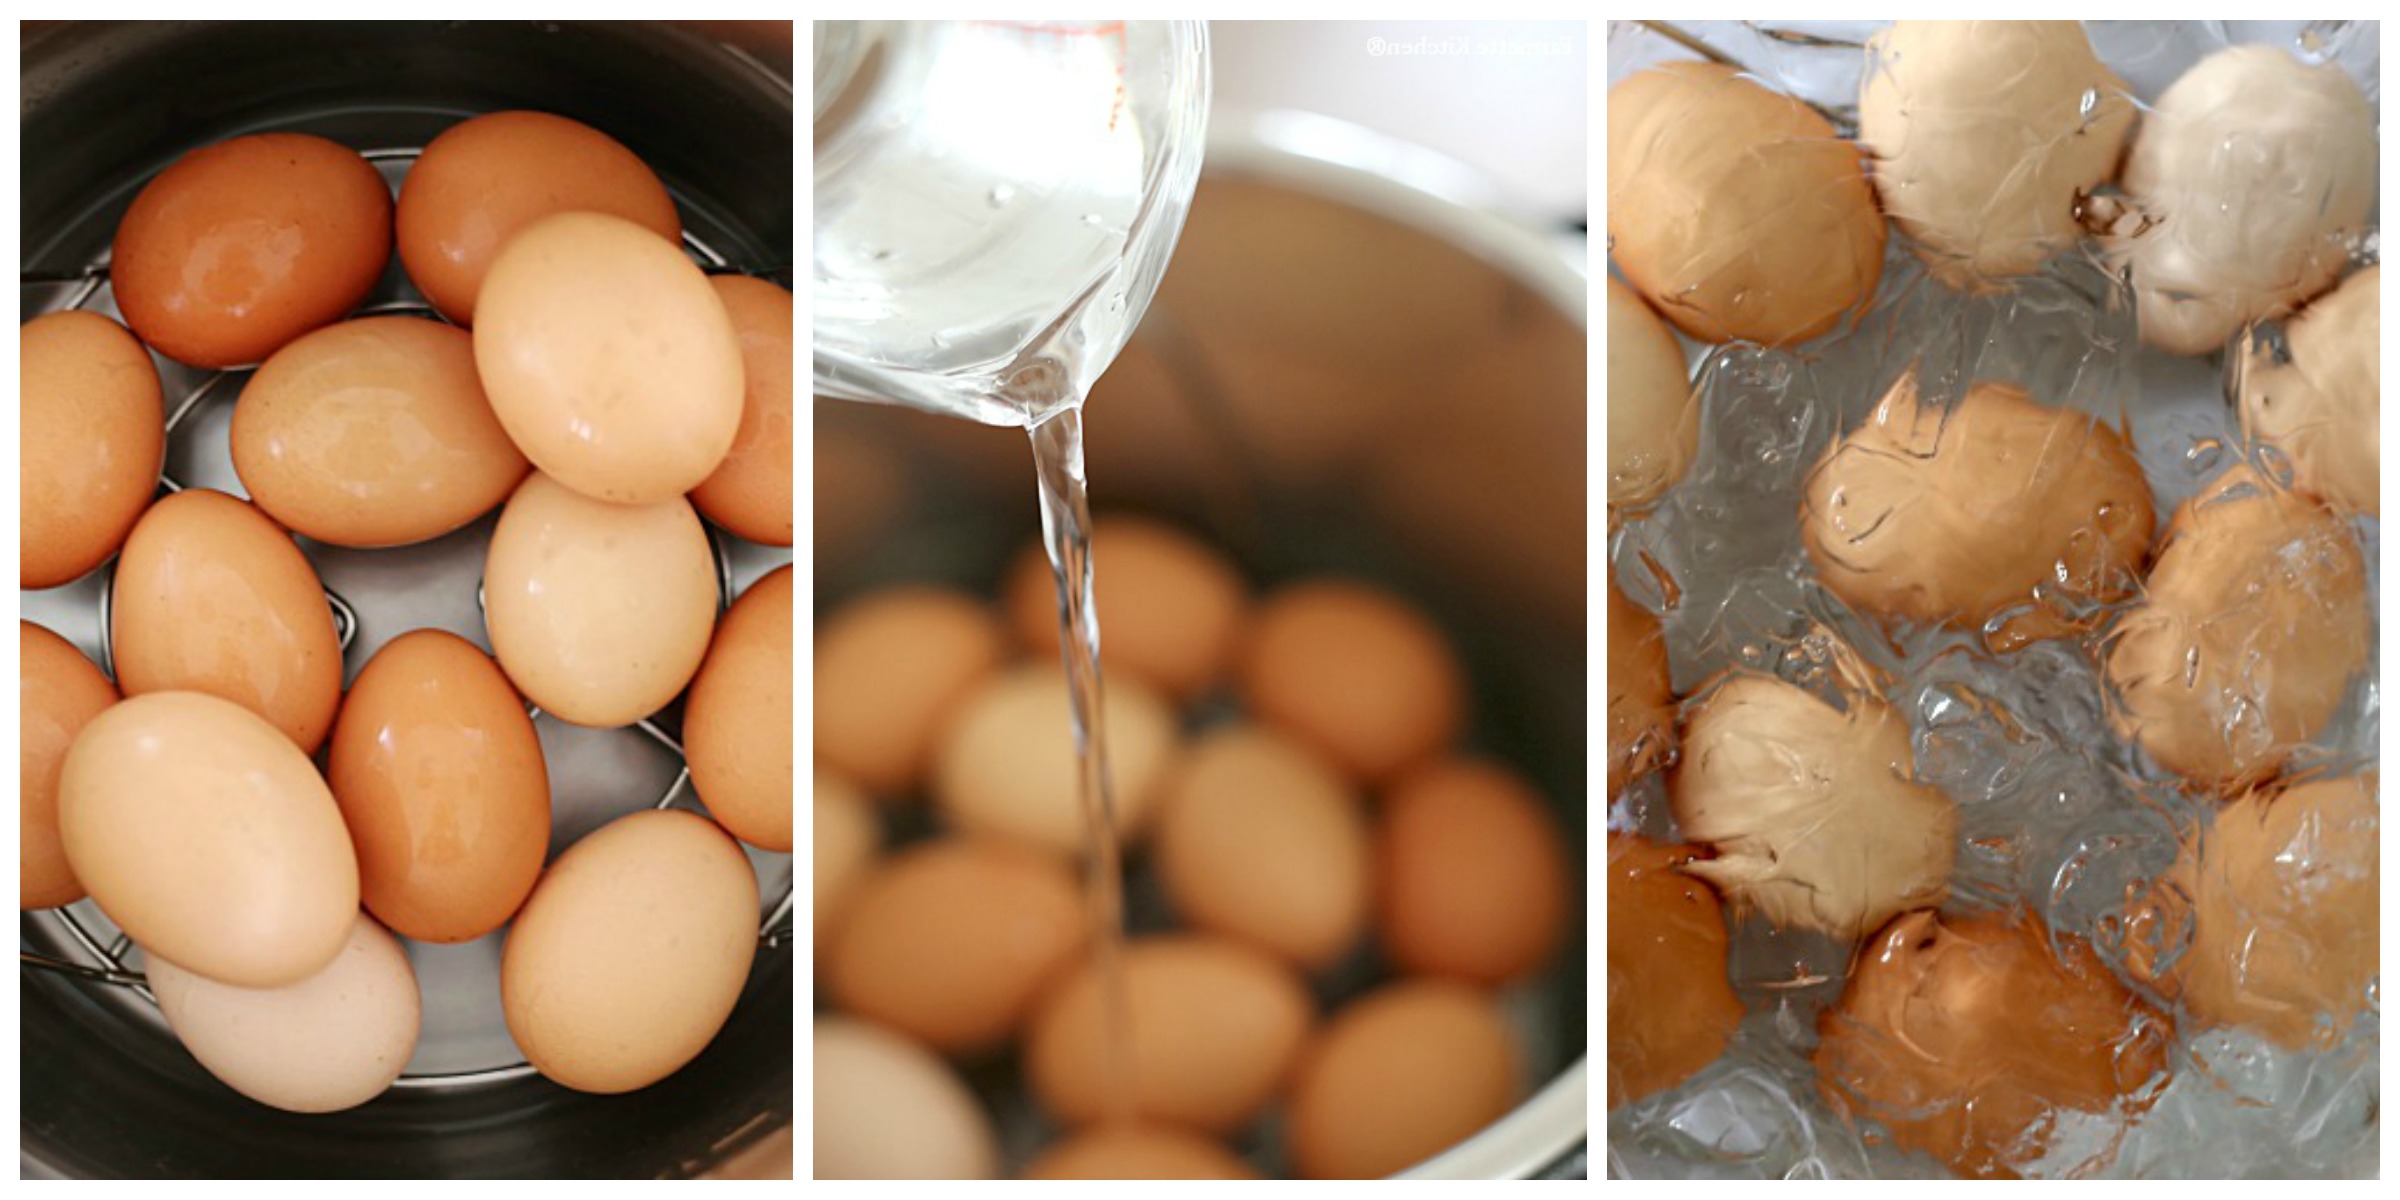 eggs in a pressure cooker, adding water to a pressure cooker, eggs in an ice bath